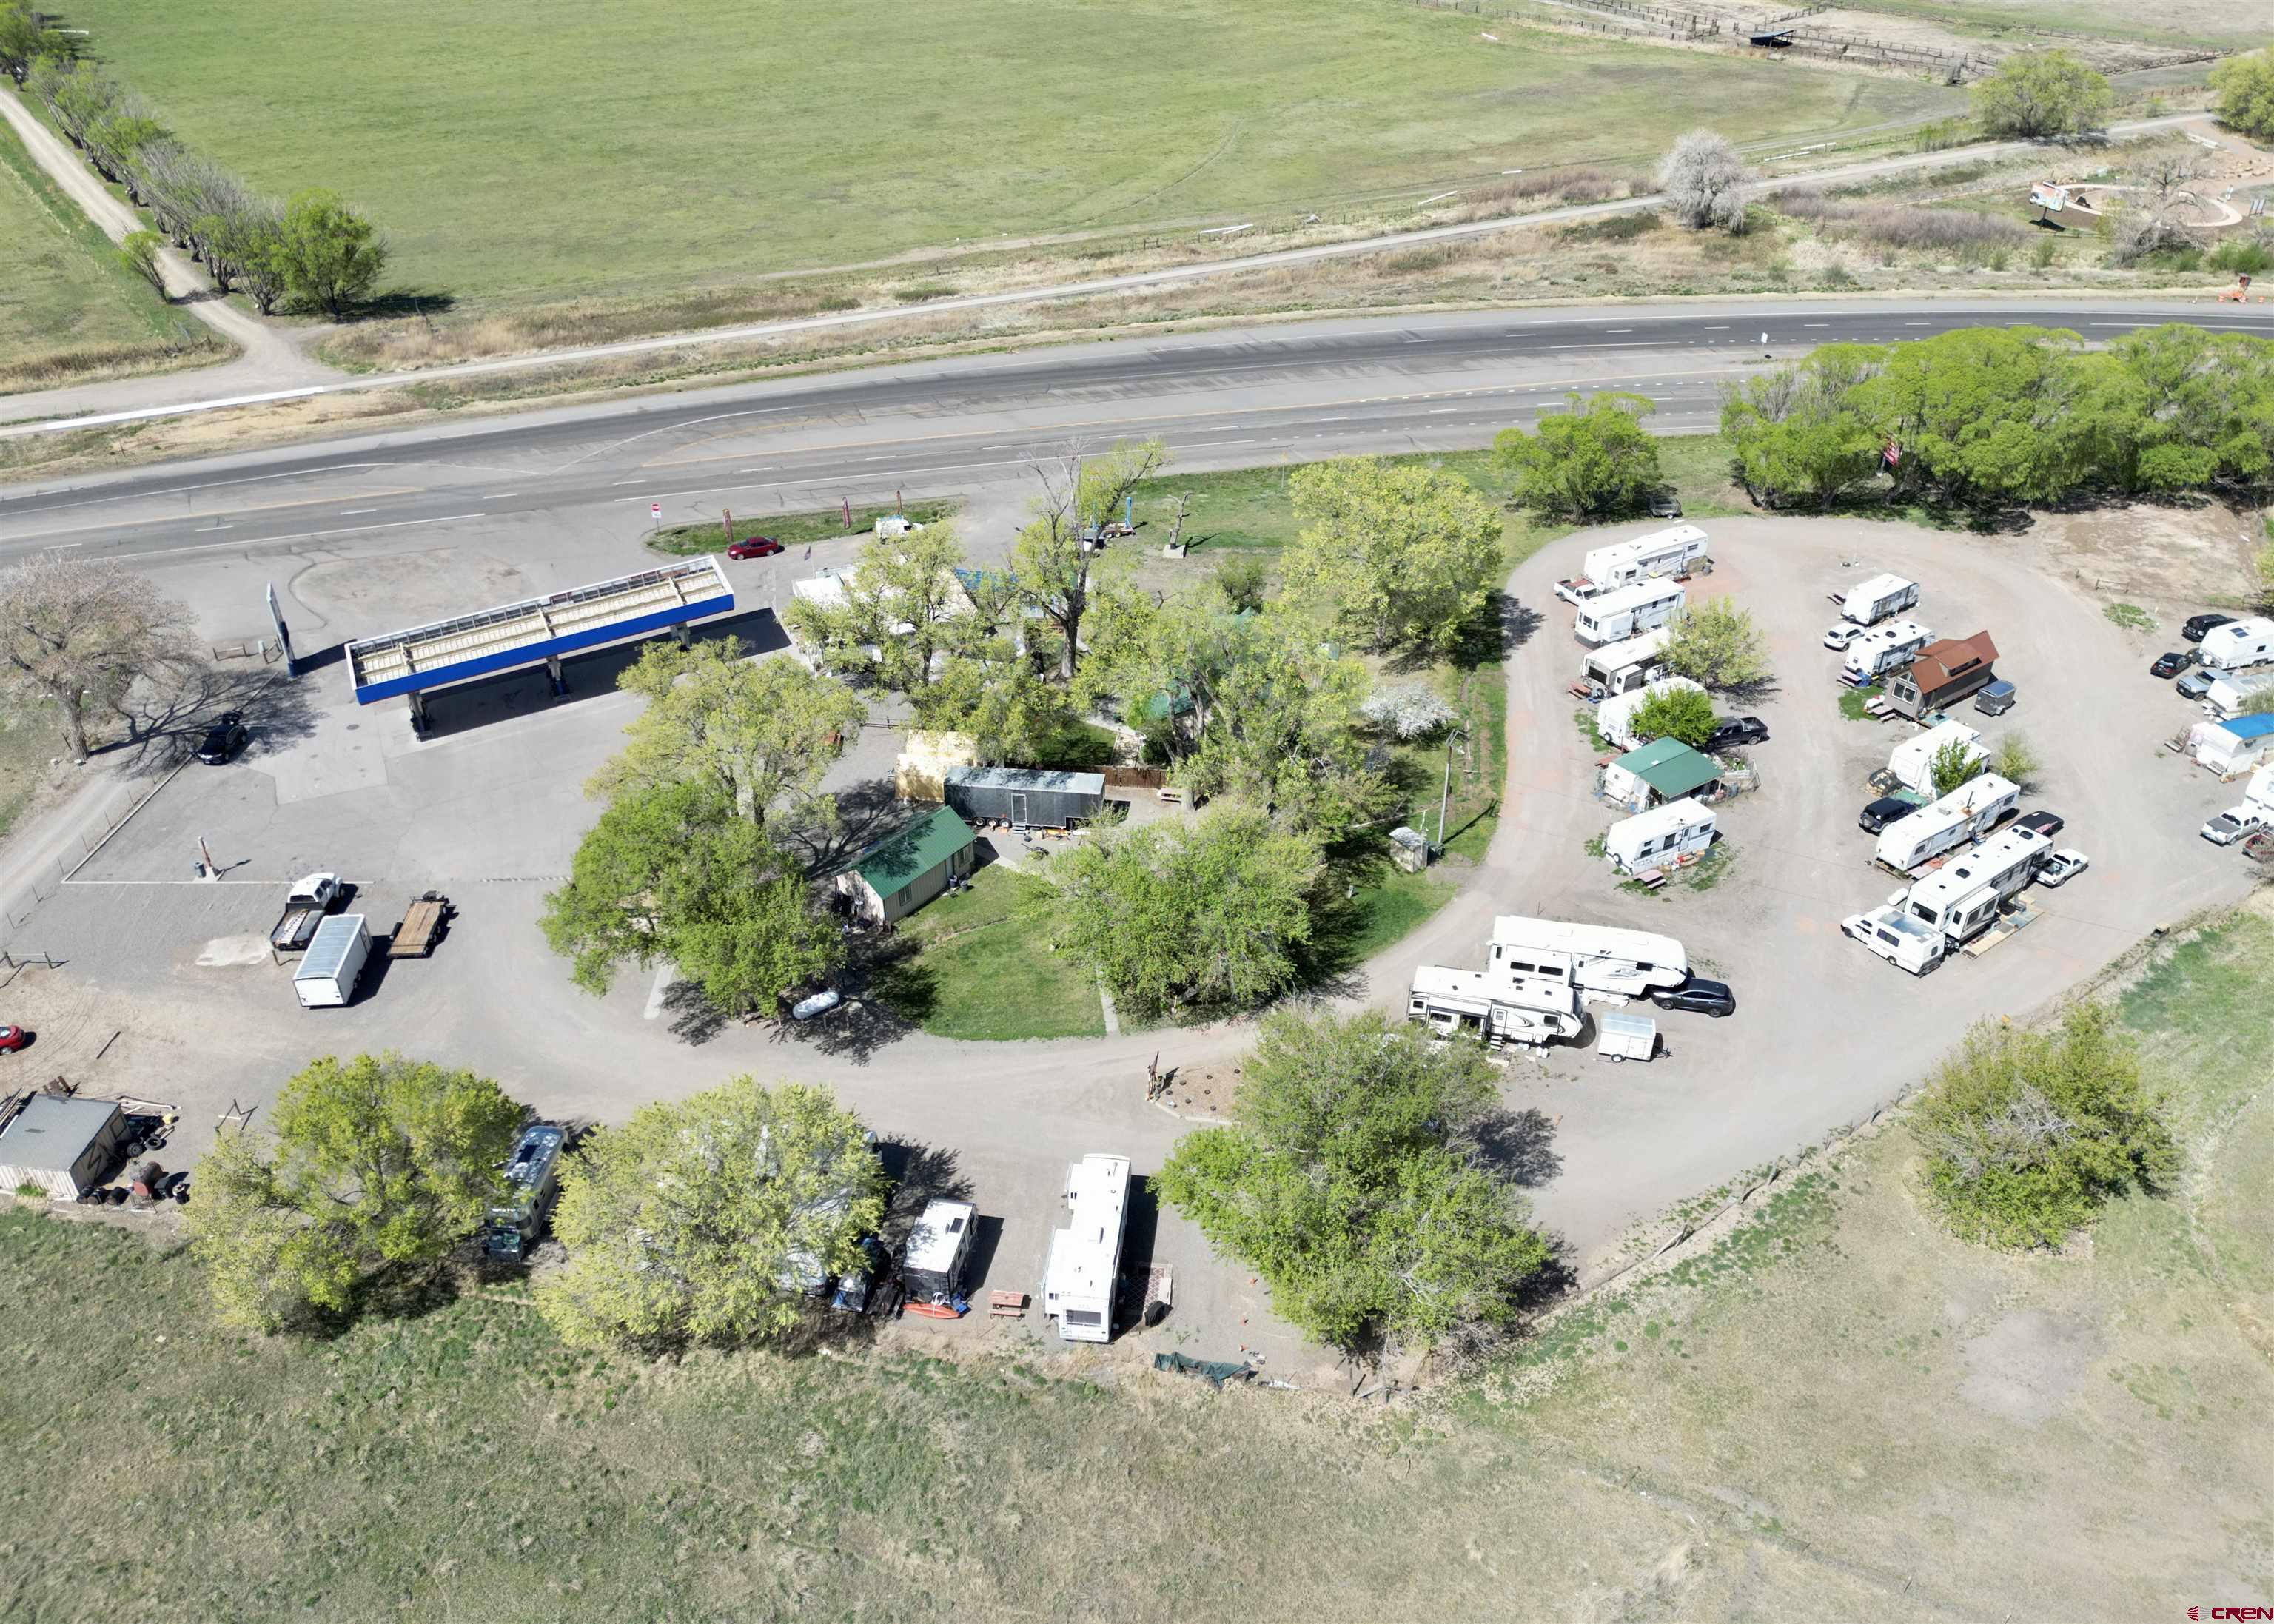 Tremendous CASH FLOW Opportunity Awaits! The Hangin Tree RV Park with Gas Station and Convenience Store with Deli  has been a local fixture for over 40 years.  The property consists of:    -   3.758 Acres.    -   25 RV Sites.      -   A 1,590 sq.ft. 2+bedroom and 3 bath Residence with Fence Enclosure.    -   A Deli/Convenience Store.    -   A Canopy over the Gas Pumps.      -   Shower/Laundry Building.      -   An Office Building.       -   2 - Storage Buildings.     -   2 Car Parking Canopy.     -   Propane Dispenser.      -   The Traffic Count has exploded in recent years.    -   Financials Available with NDA.